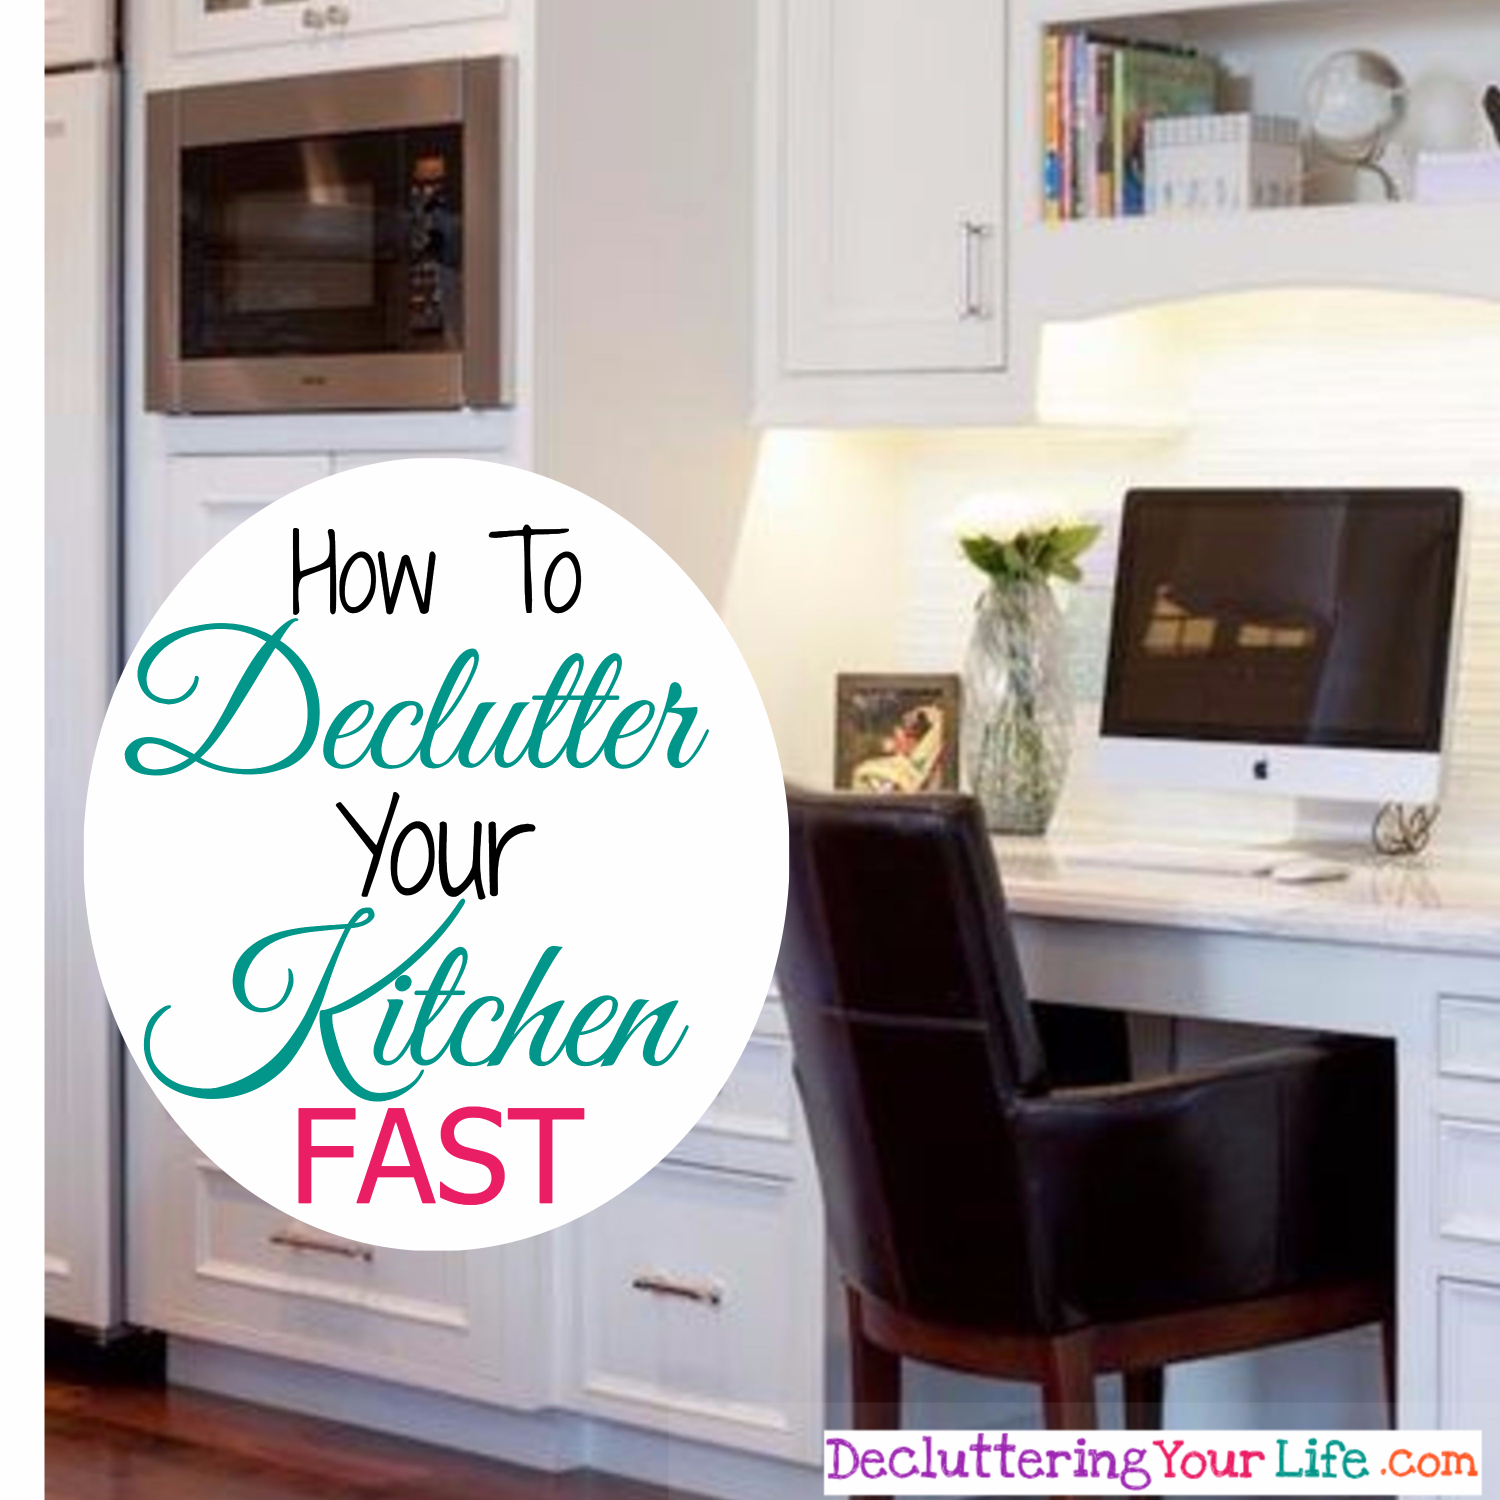 Declutter your kitchen - how to declutter your kitchen FAST with this simple one-day (or less) declutter method.